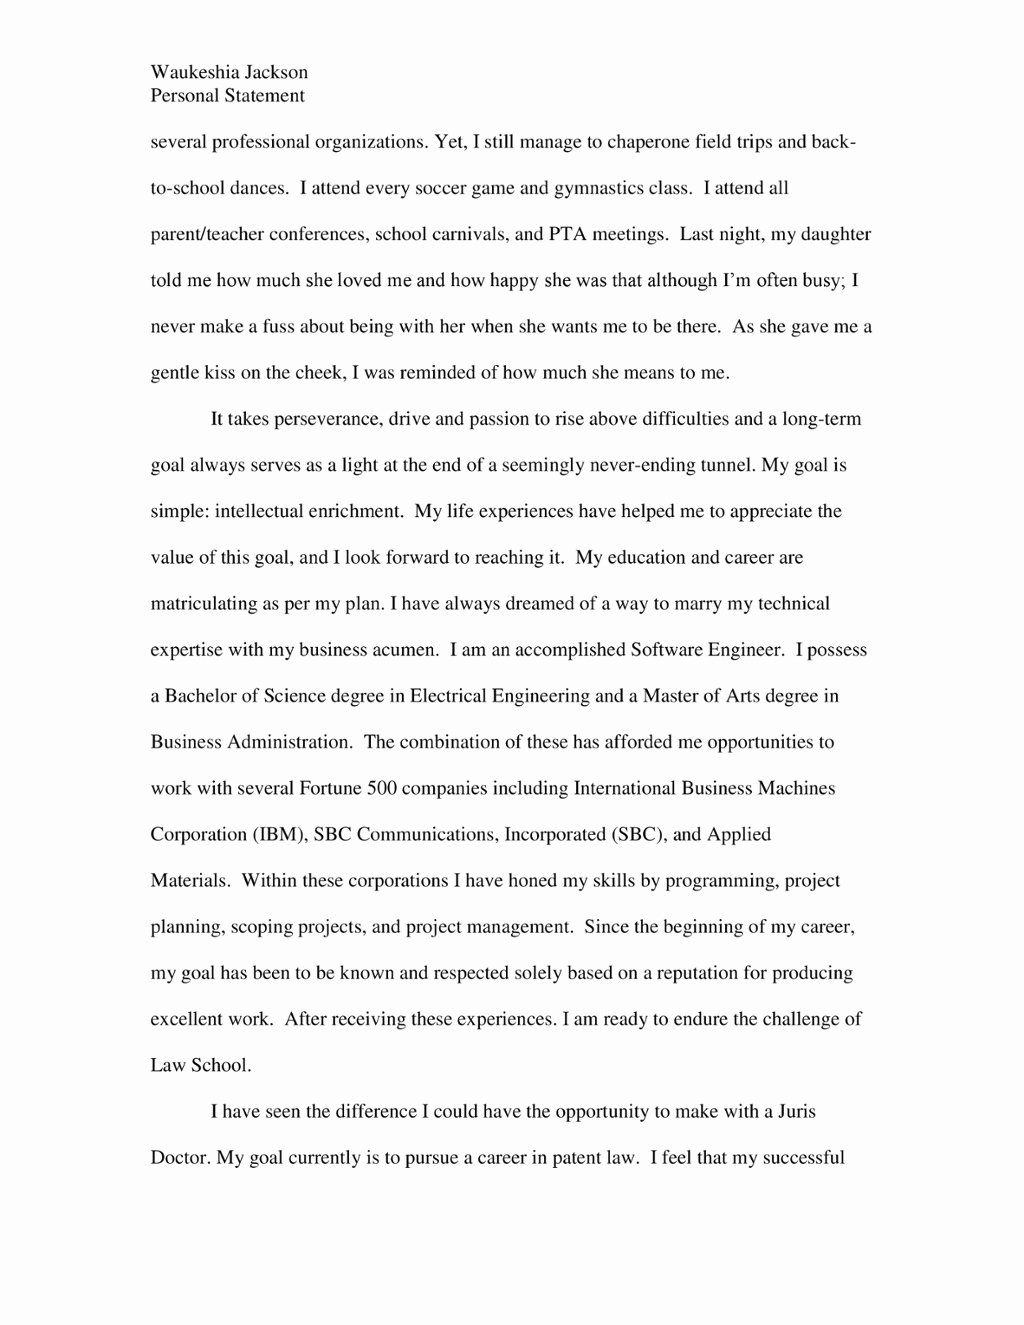 Personal Statement for School Best Of 2 Law School Personal Statements that Succeeded